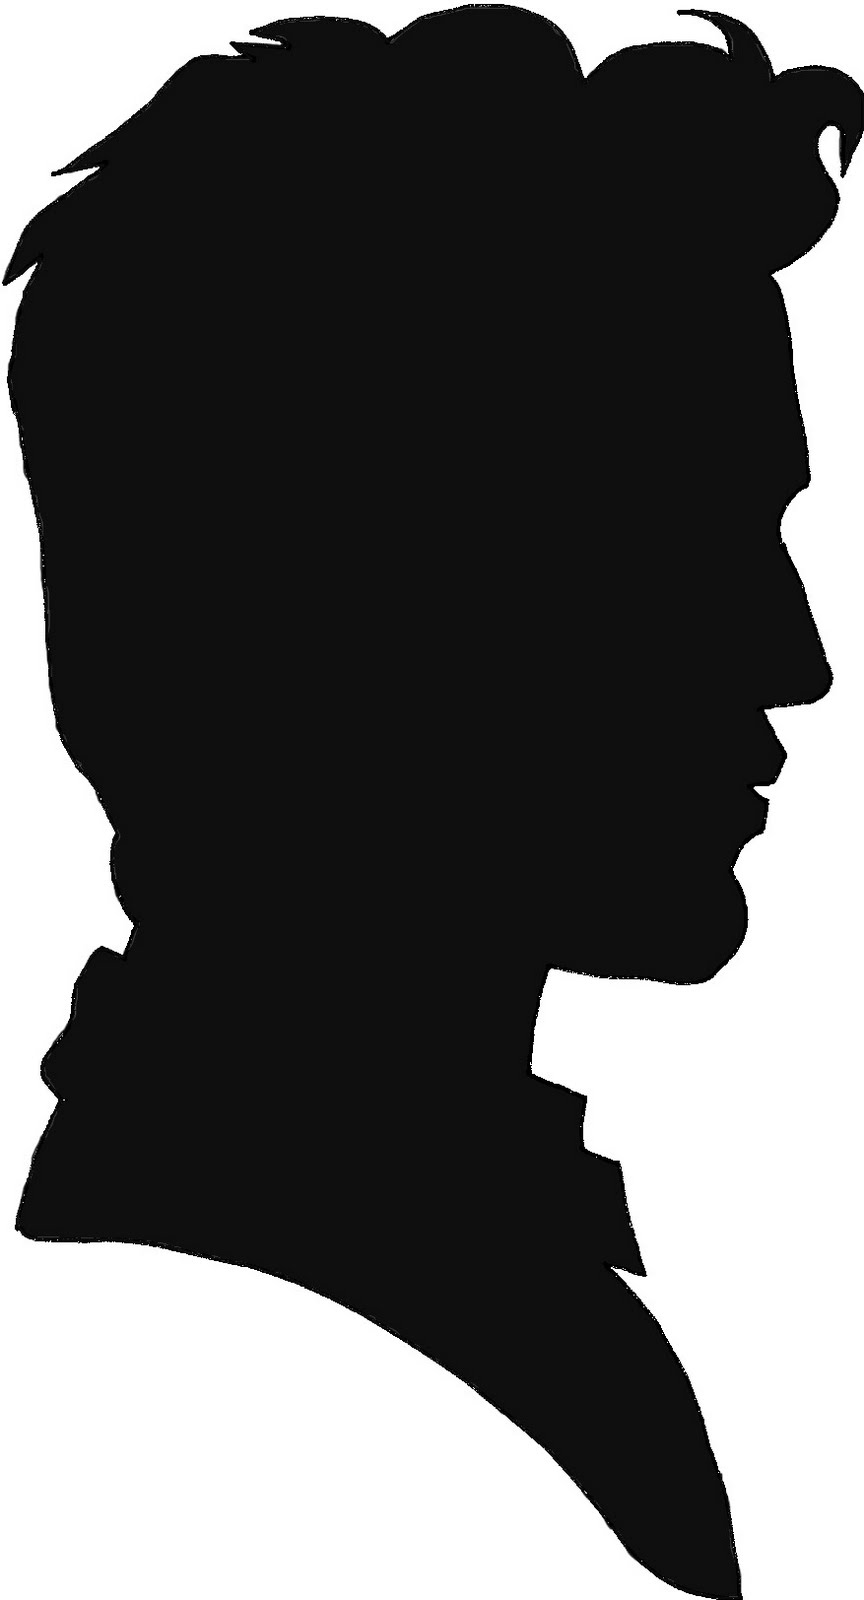 Black Man Profile Silhouette That There Was No Doubt In